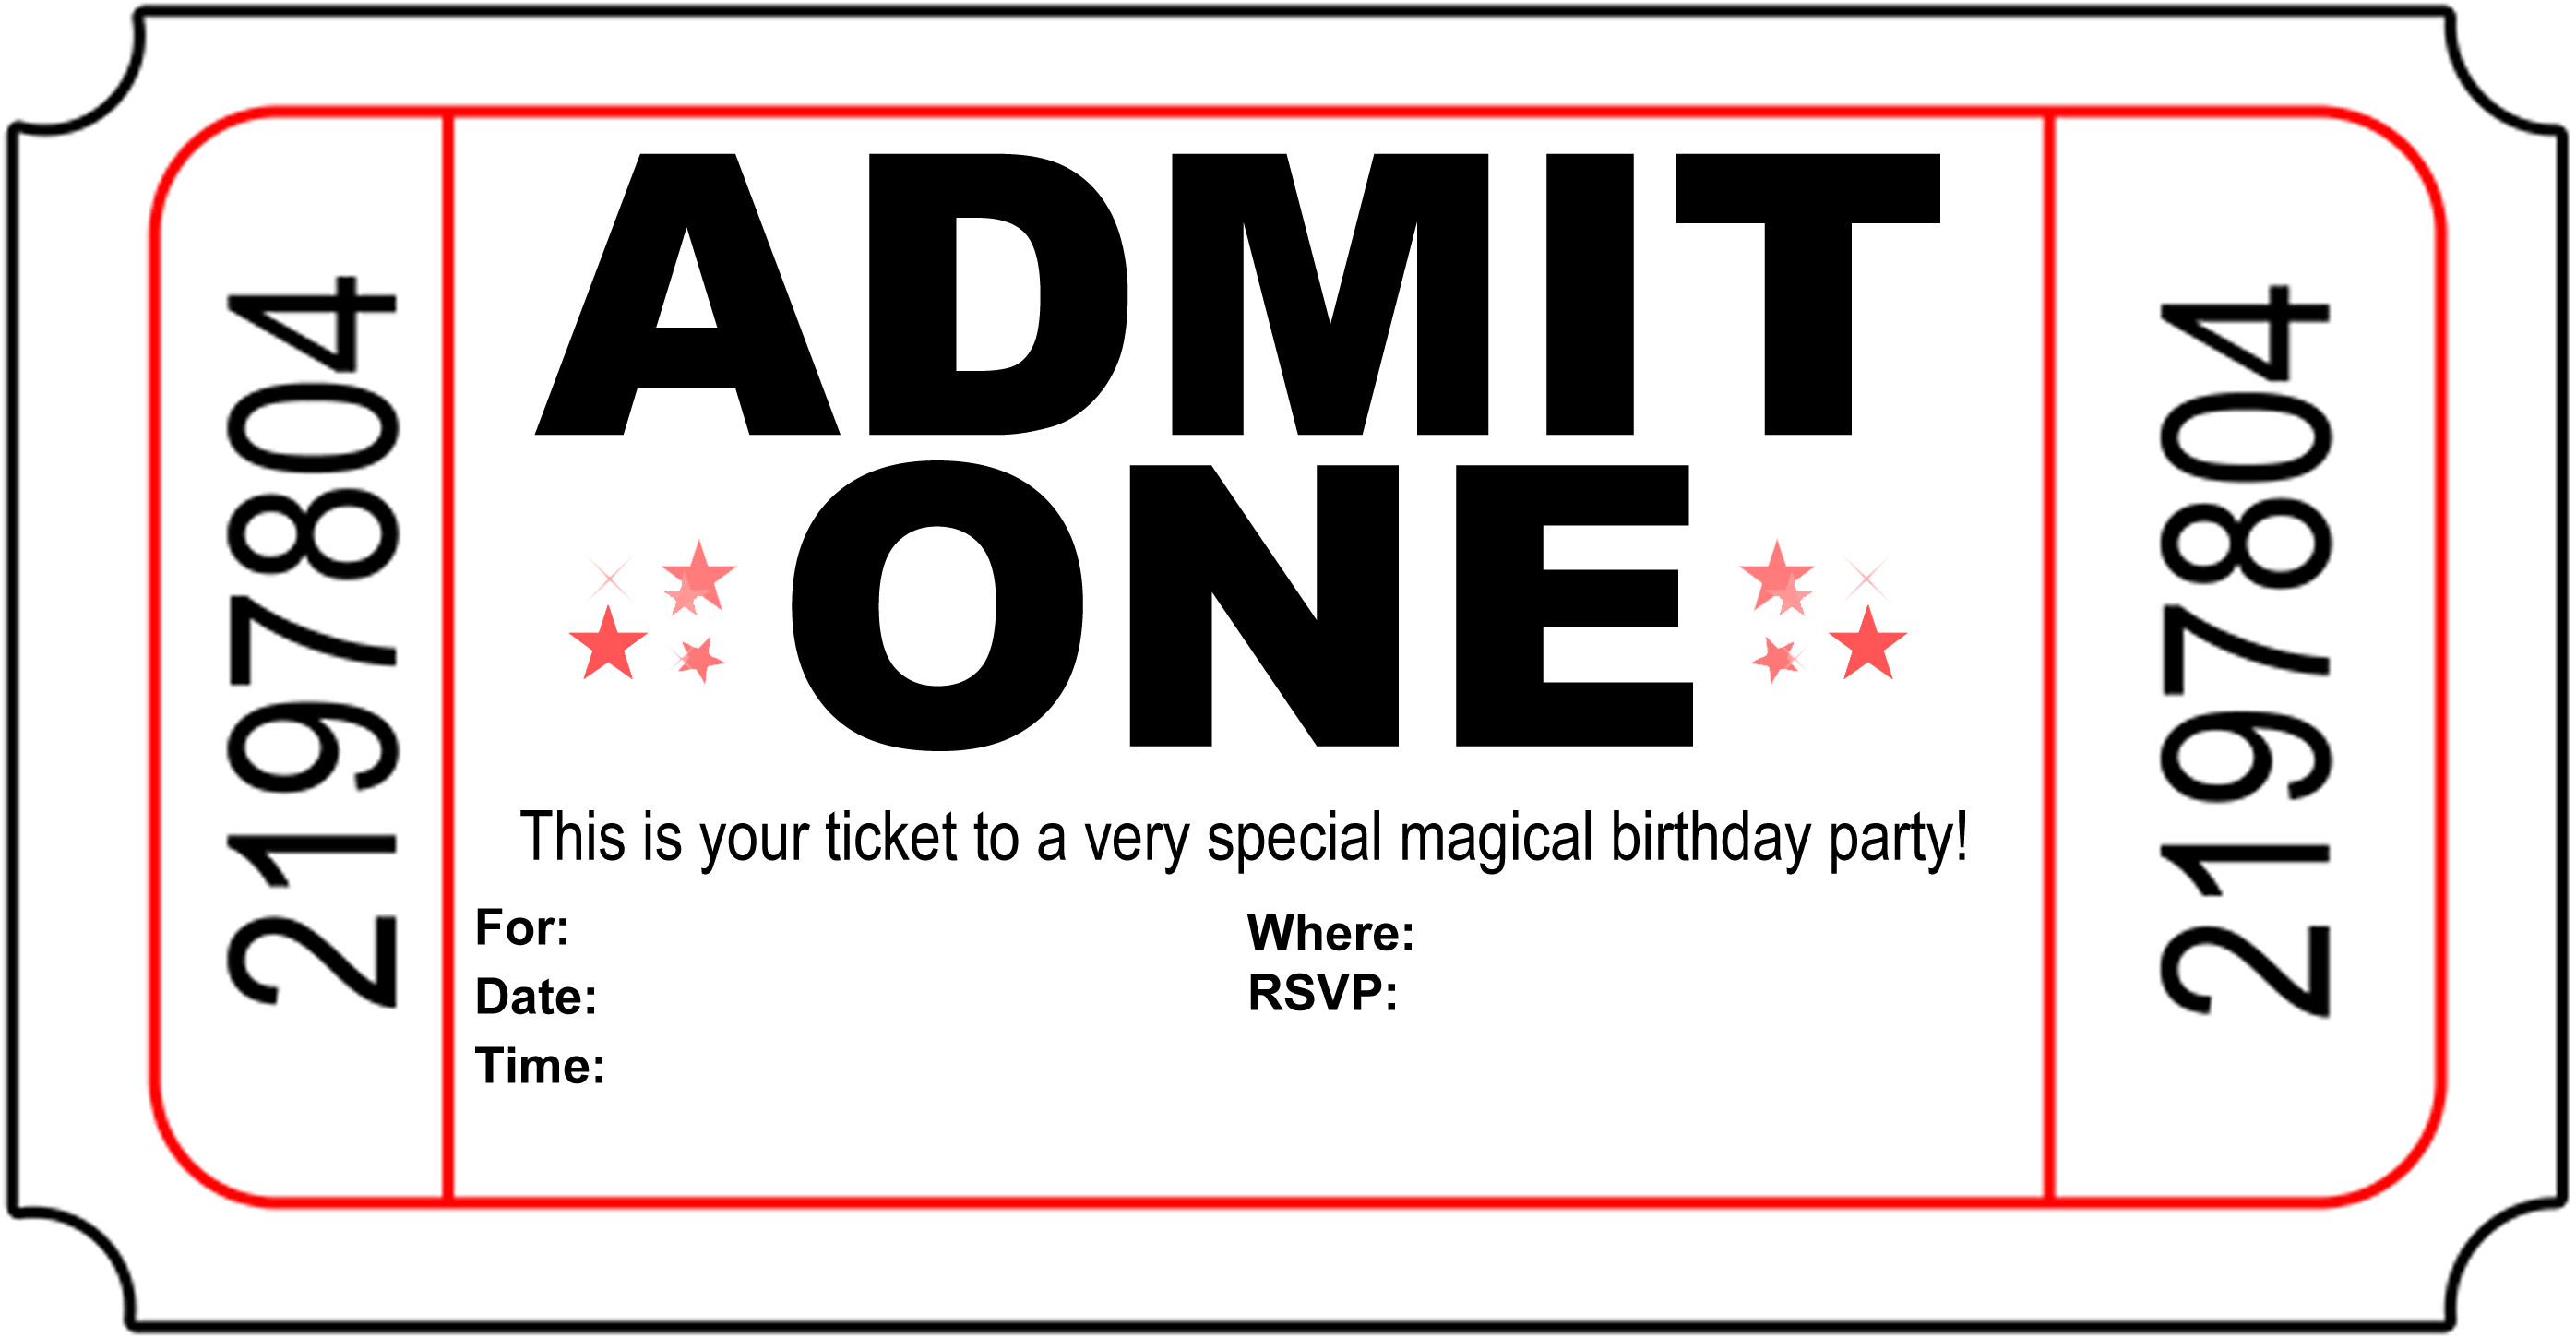 Admit One Ticket Template from clipart-library.com